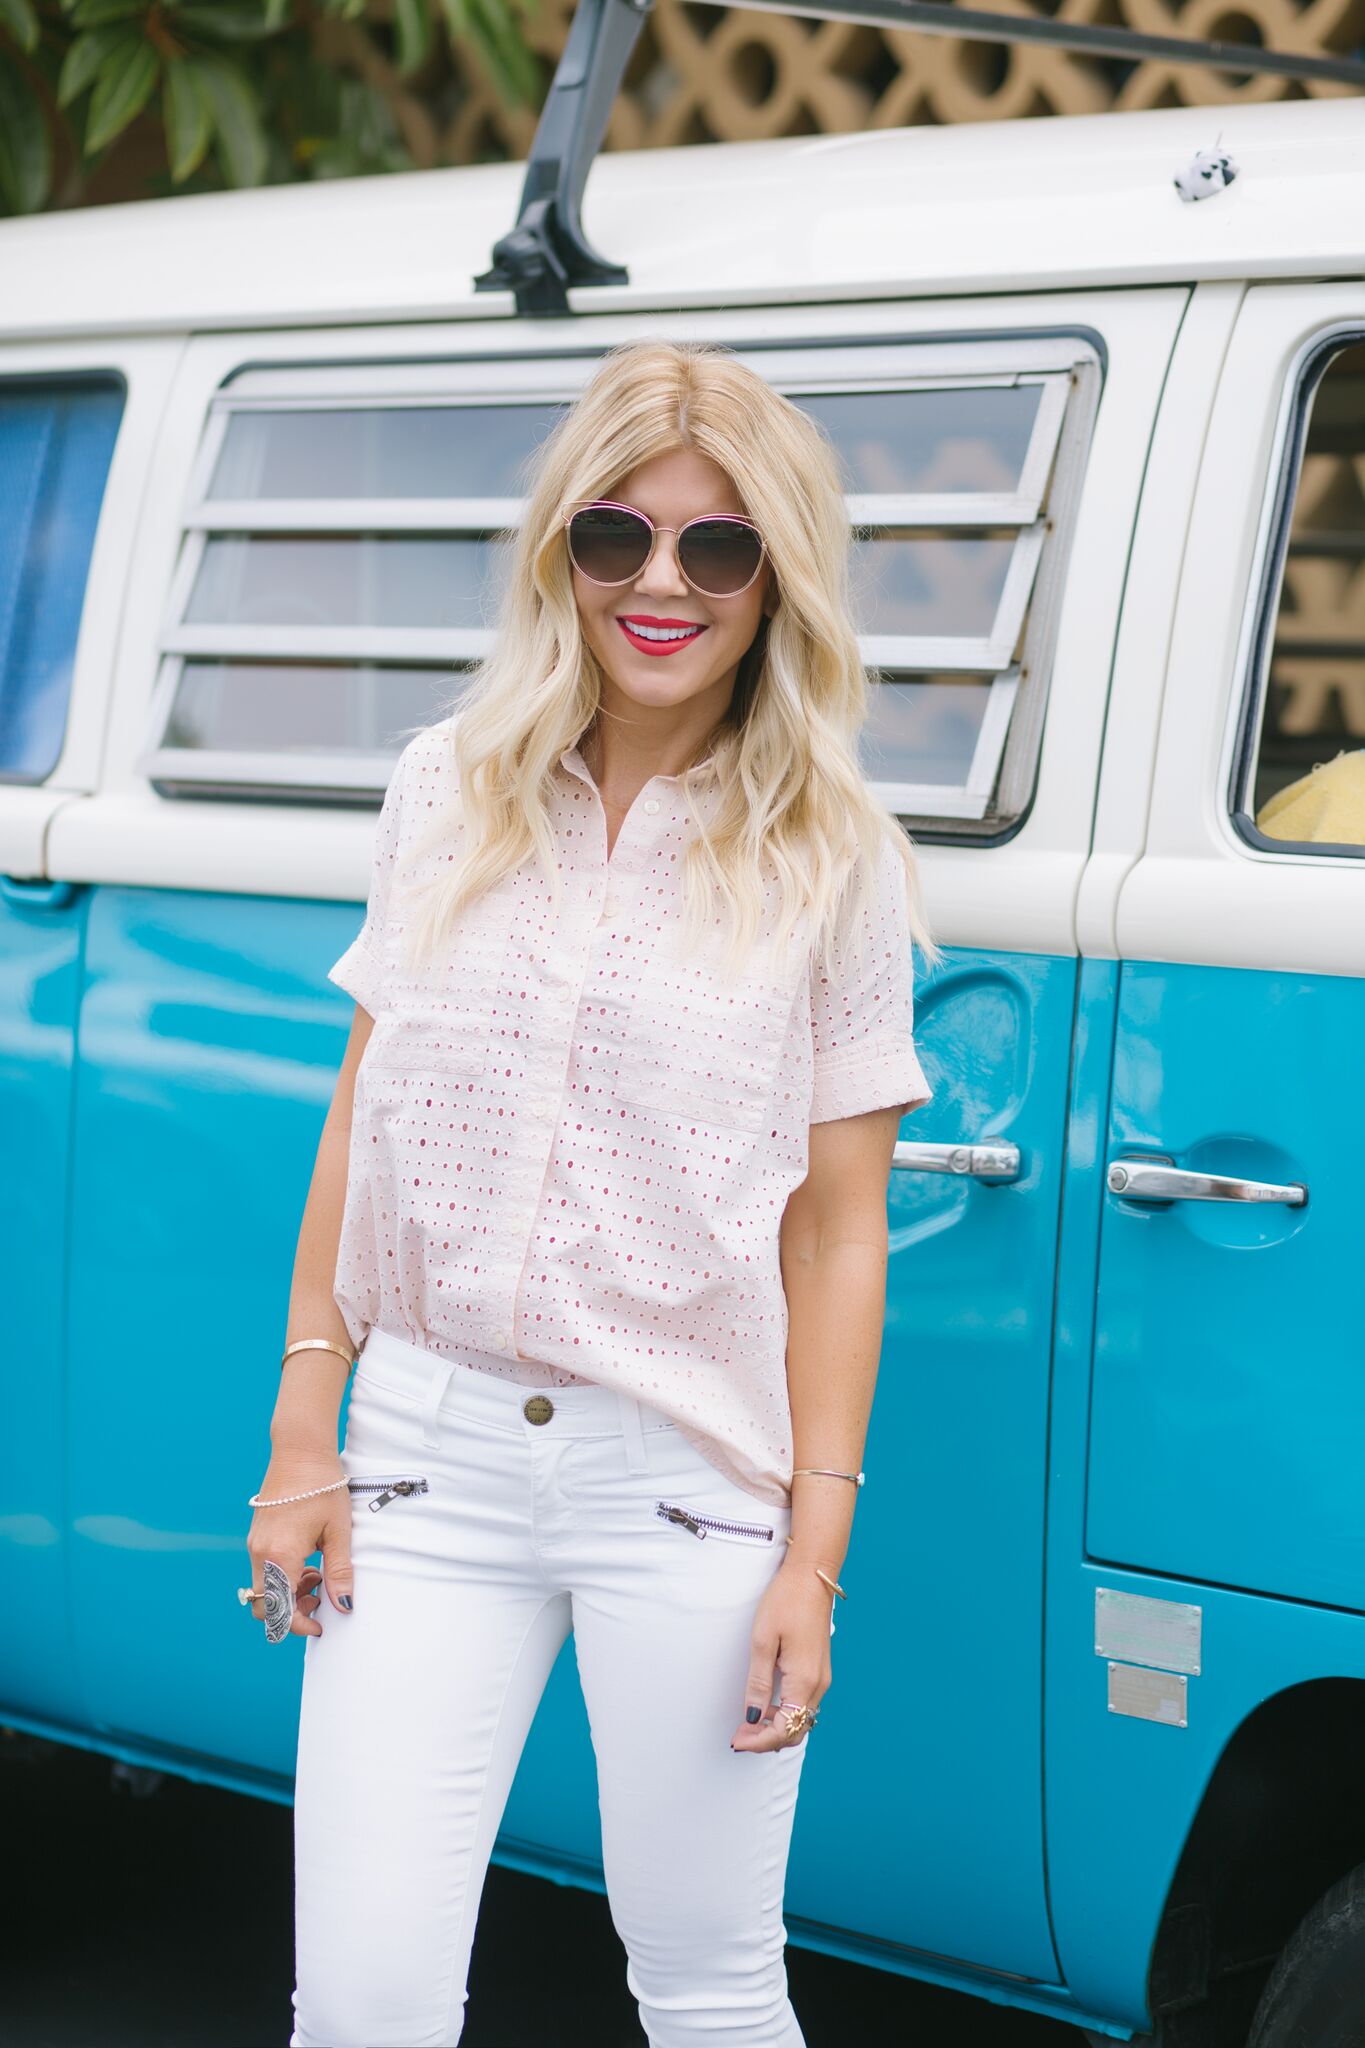 Lisa Allen of Lunchpails and Lipstick wearing Madewell, Miu Miu, White Jeans, with her blonde beach waves and a red lip by Nars